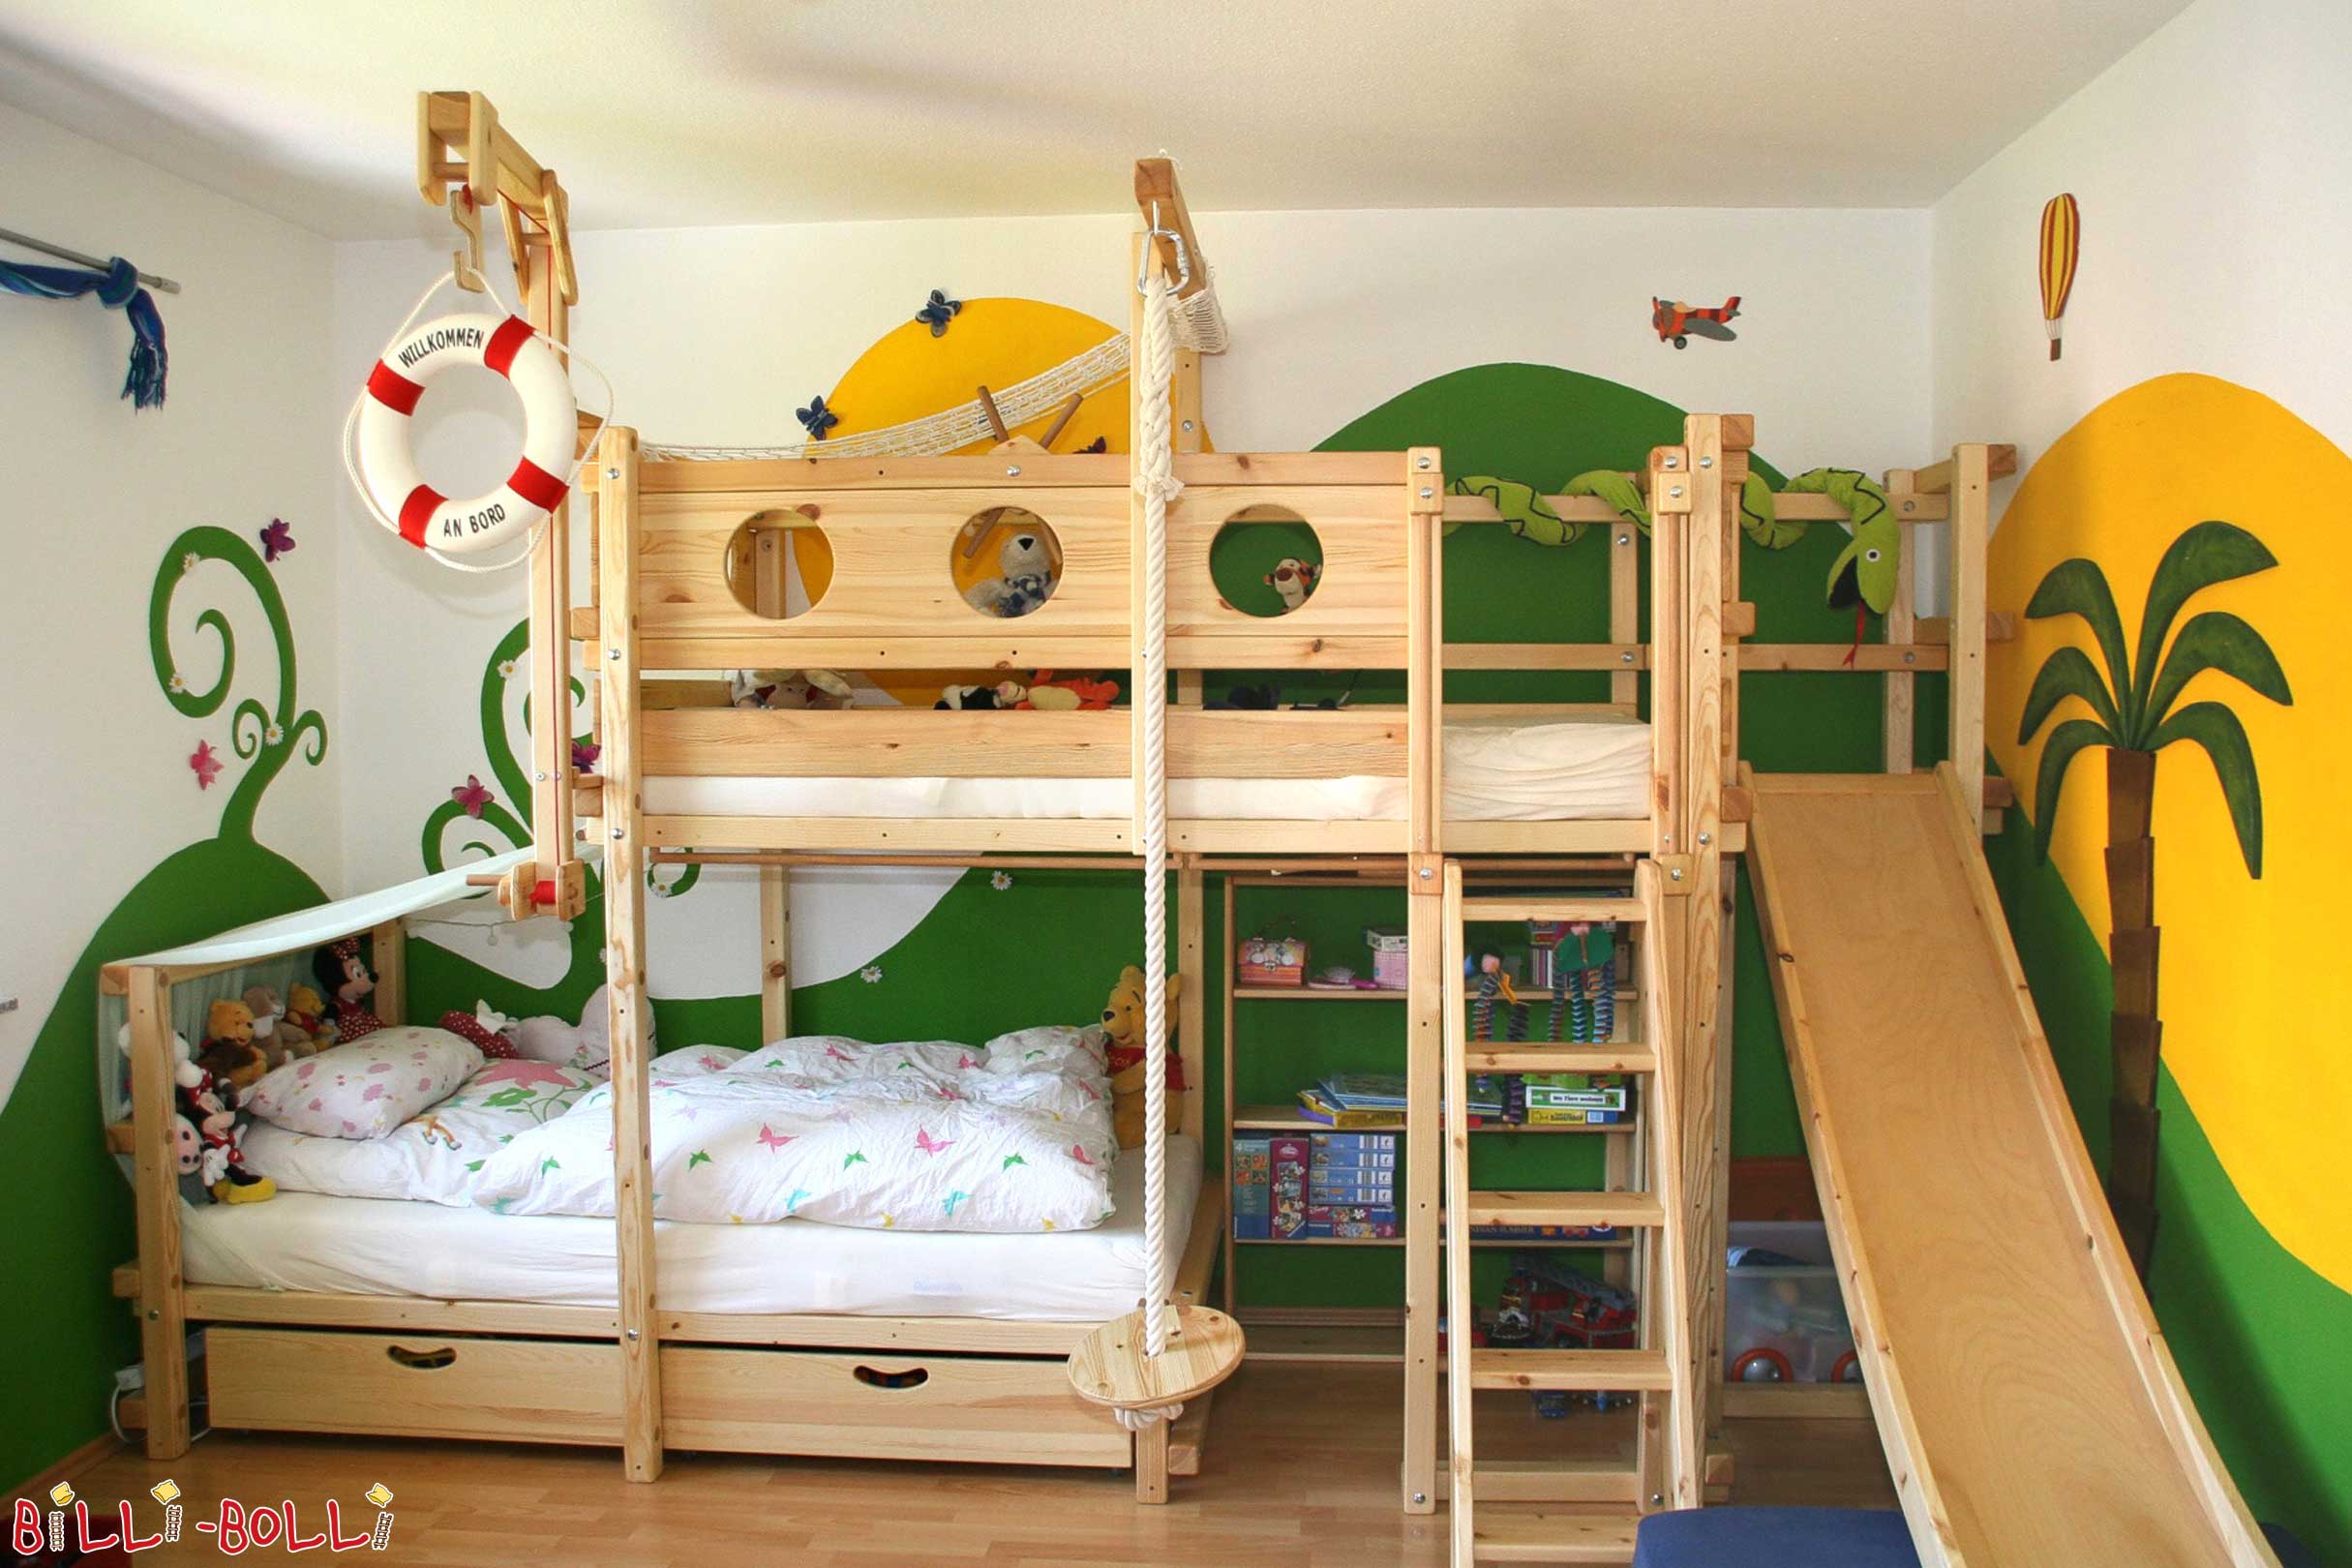 Accessories for our kids’ beds